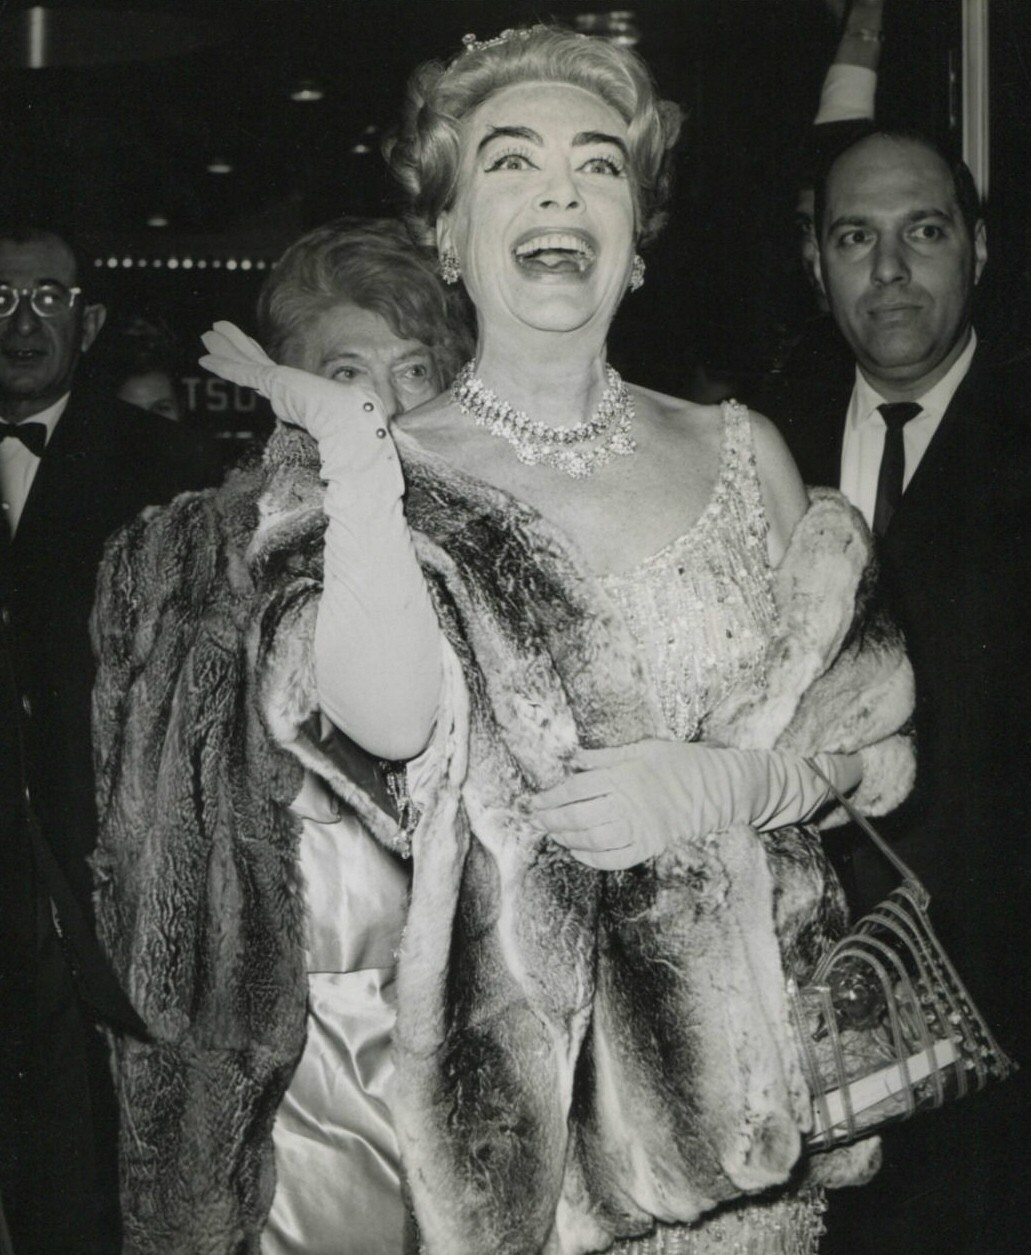 10/21/64 at the NYC Criterion Theatre premiere of 'My Fair Lady.'